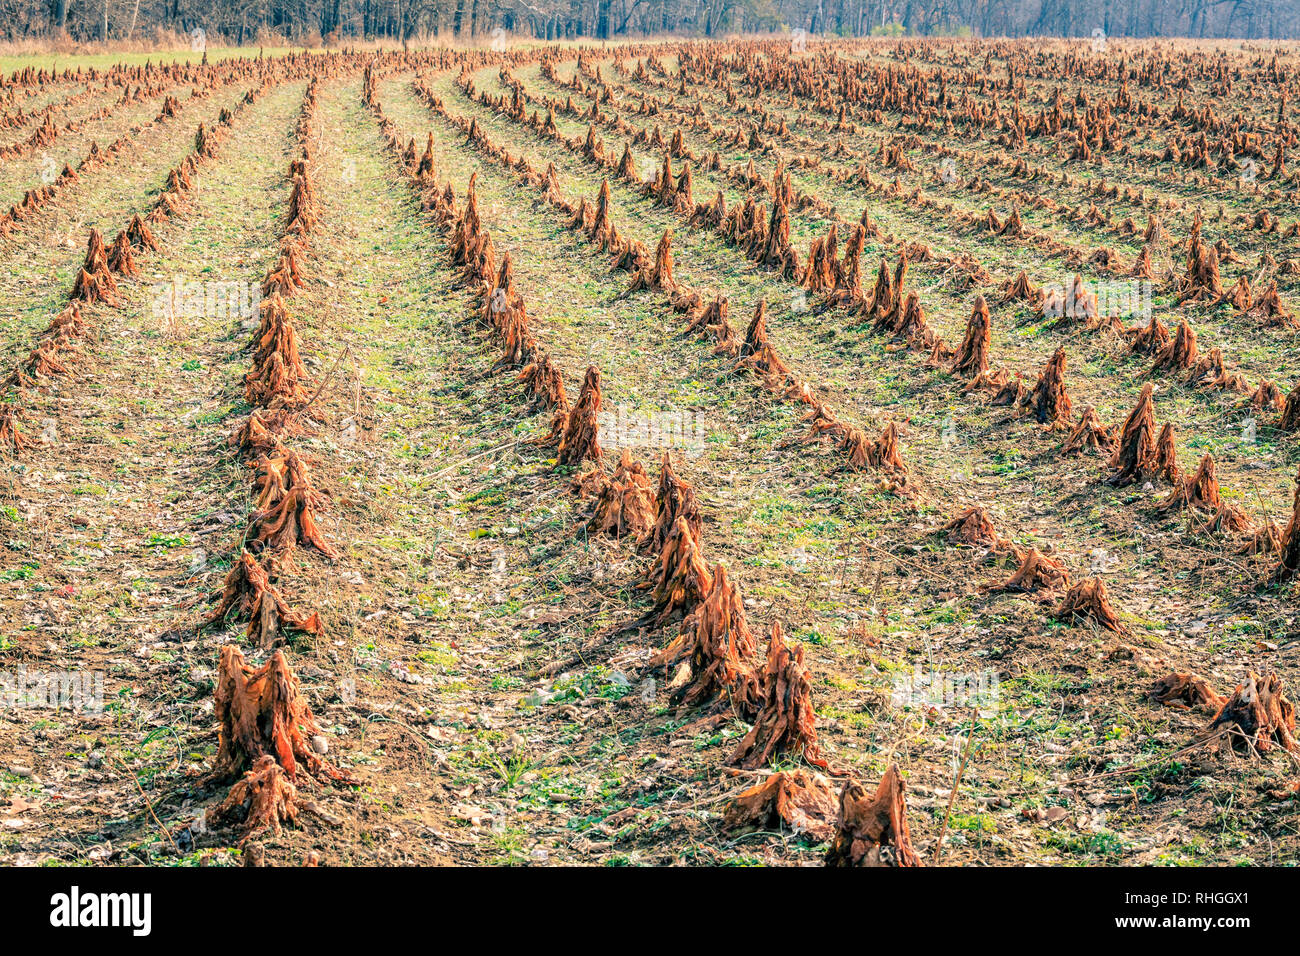 Cut stalks of burley tobacco in a field after harvest in Kentucky Stock Photo